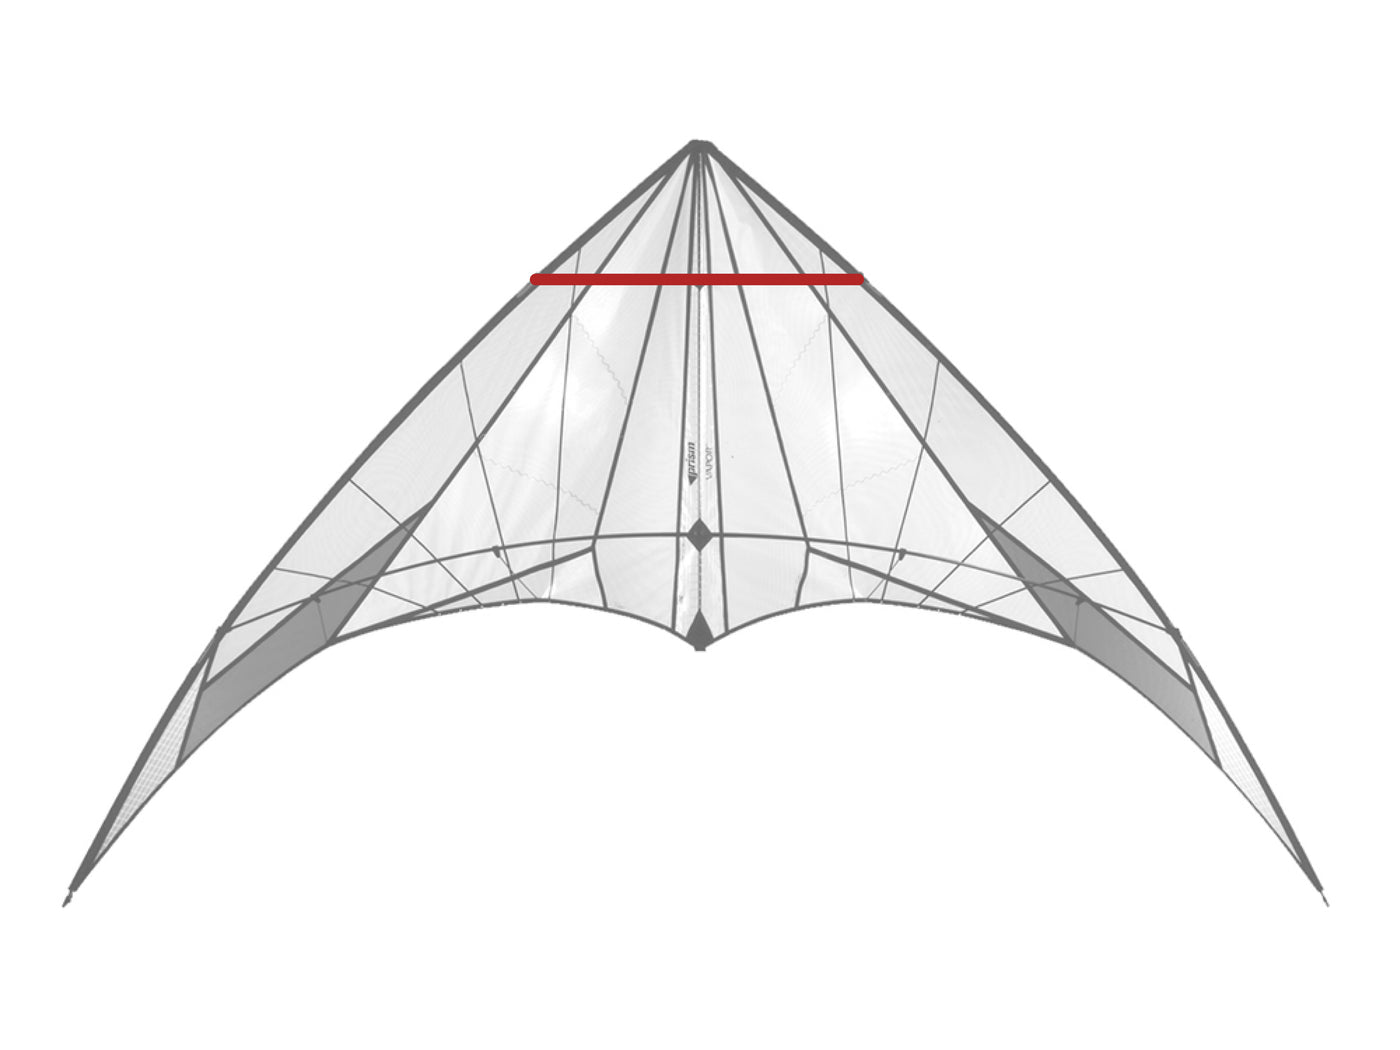 Diagram showing location of the Vapor Upper Spreader on the kite.